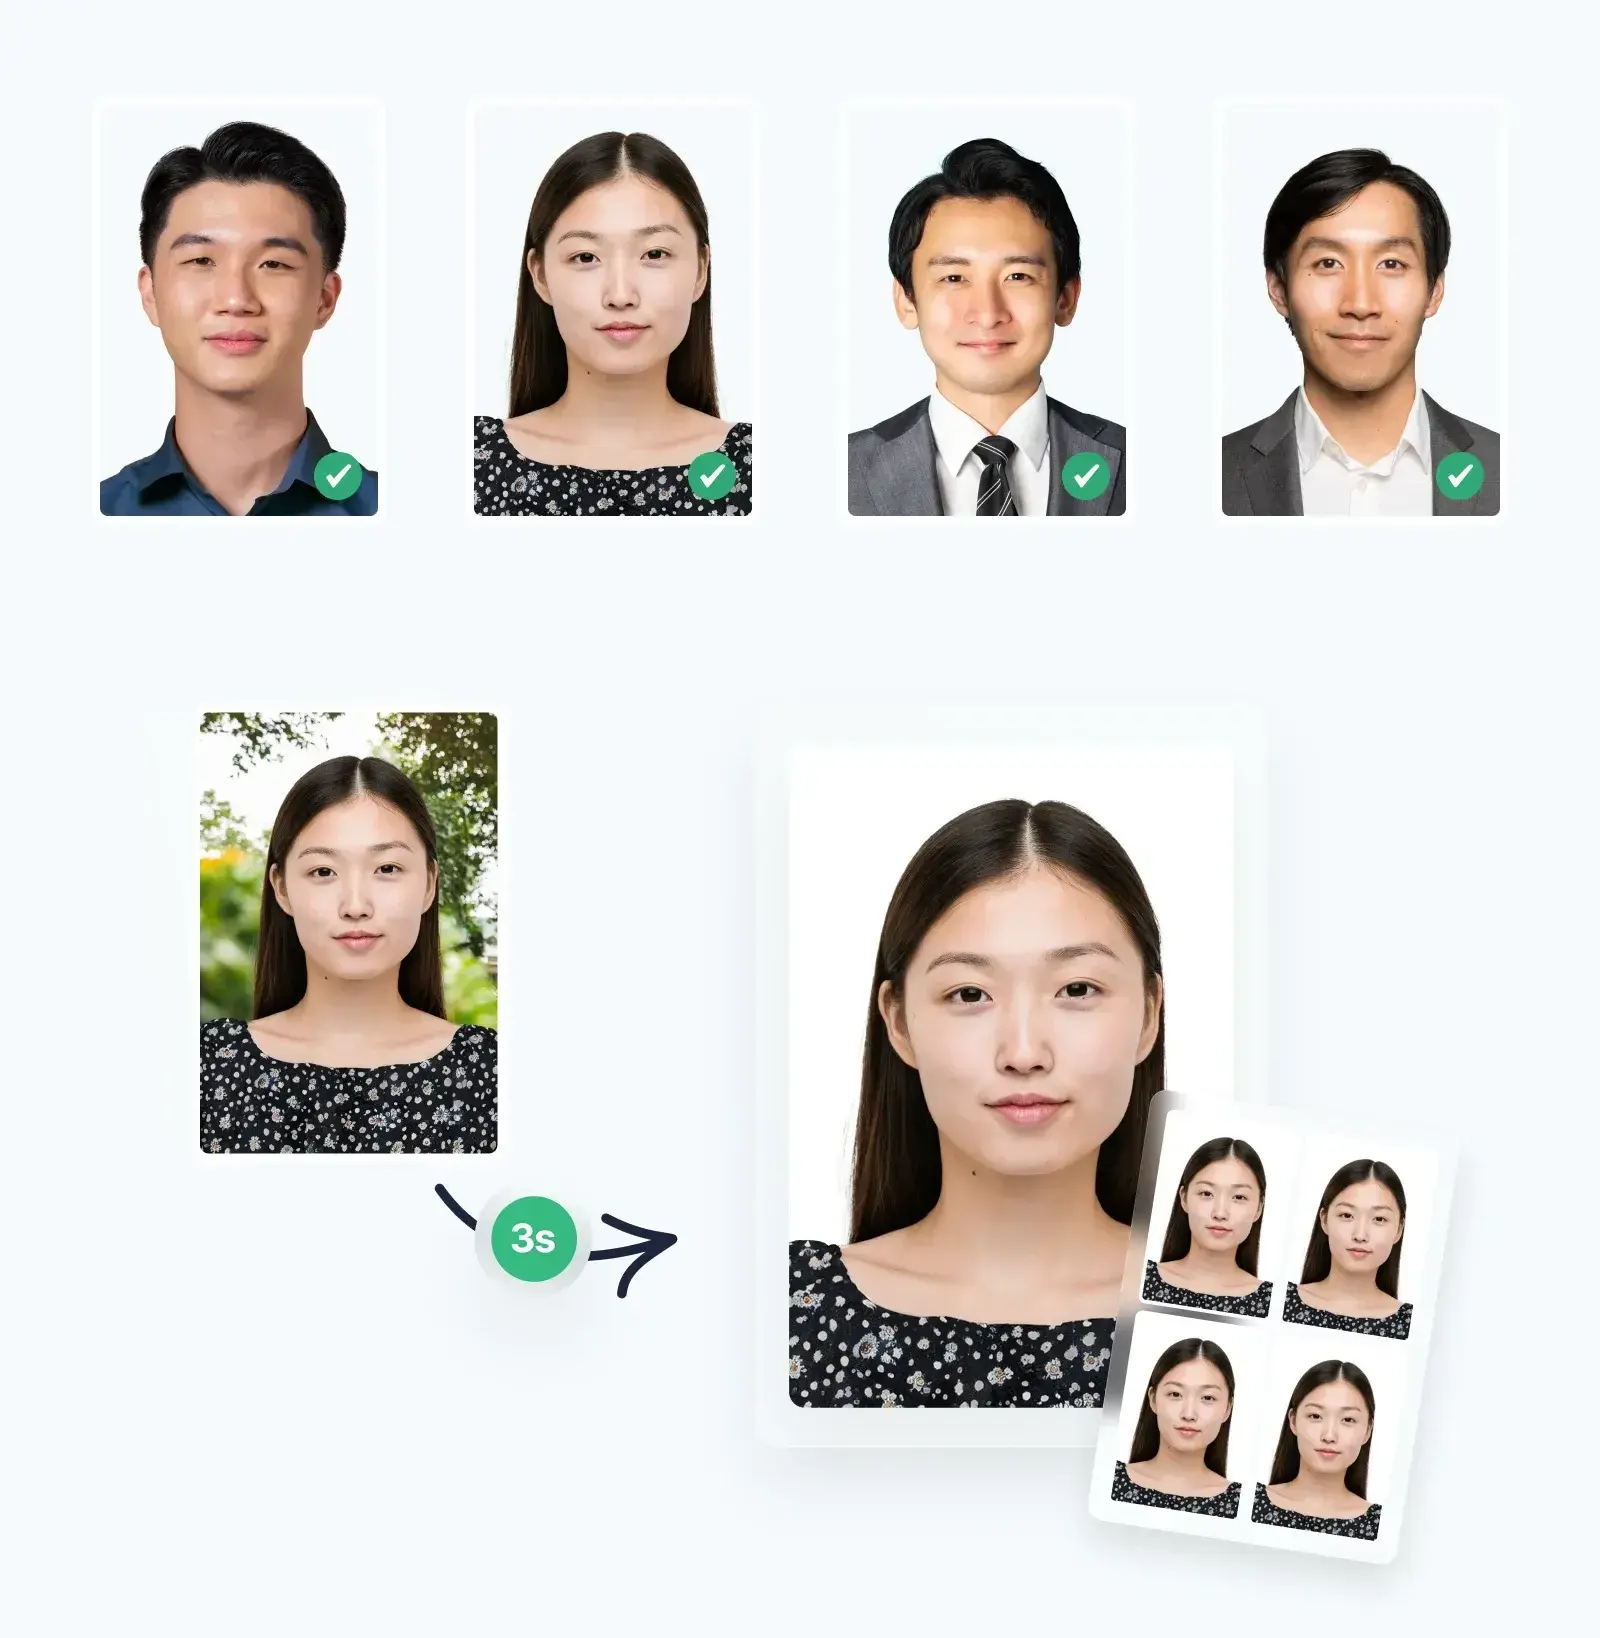 Get a compliant Chinese passport photo in seconds with Passport Photo Online.